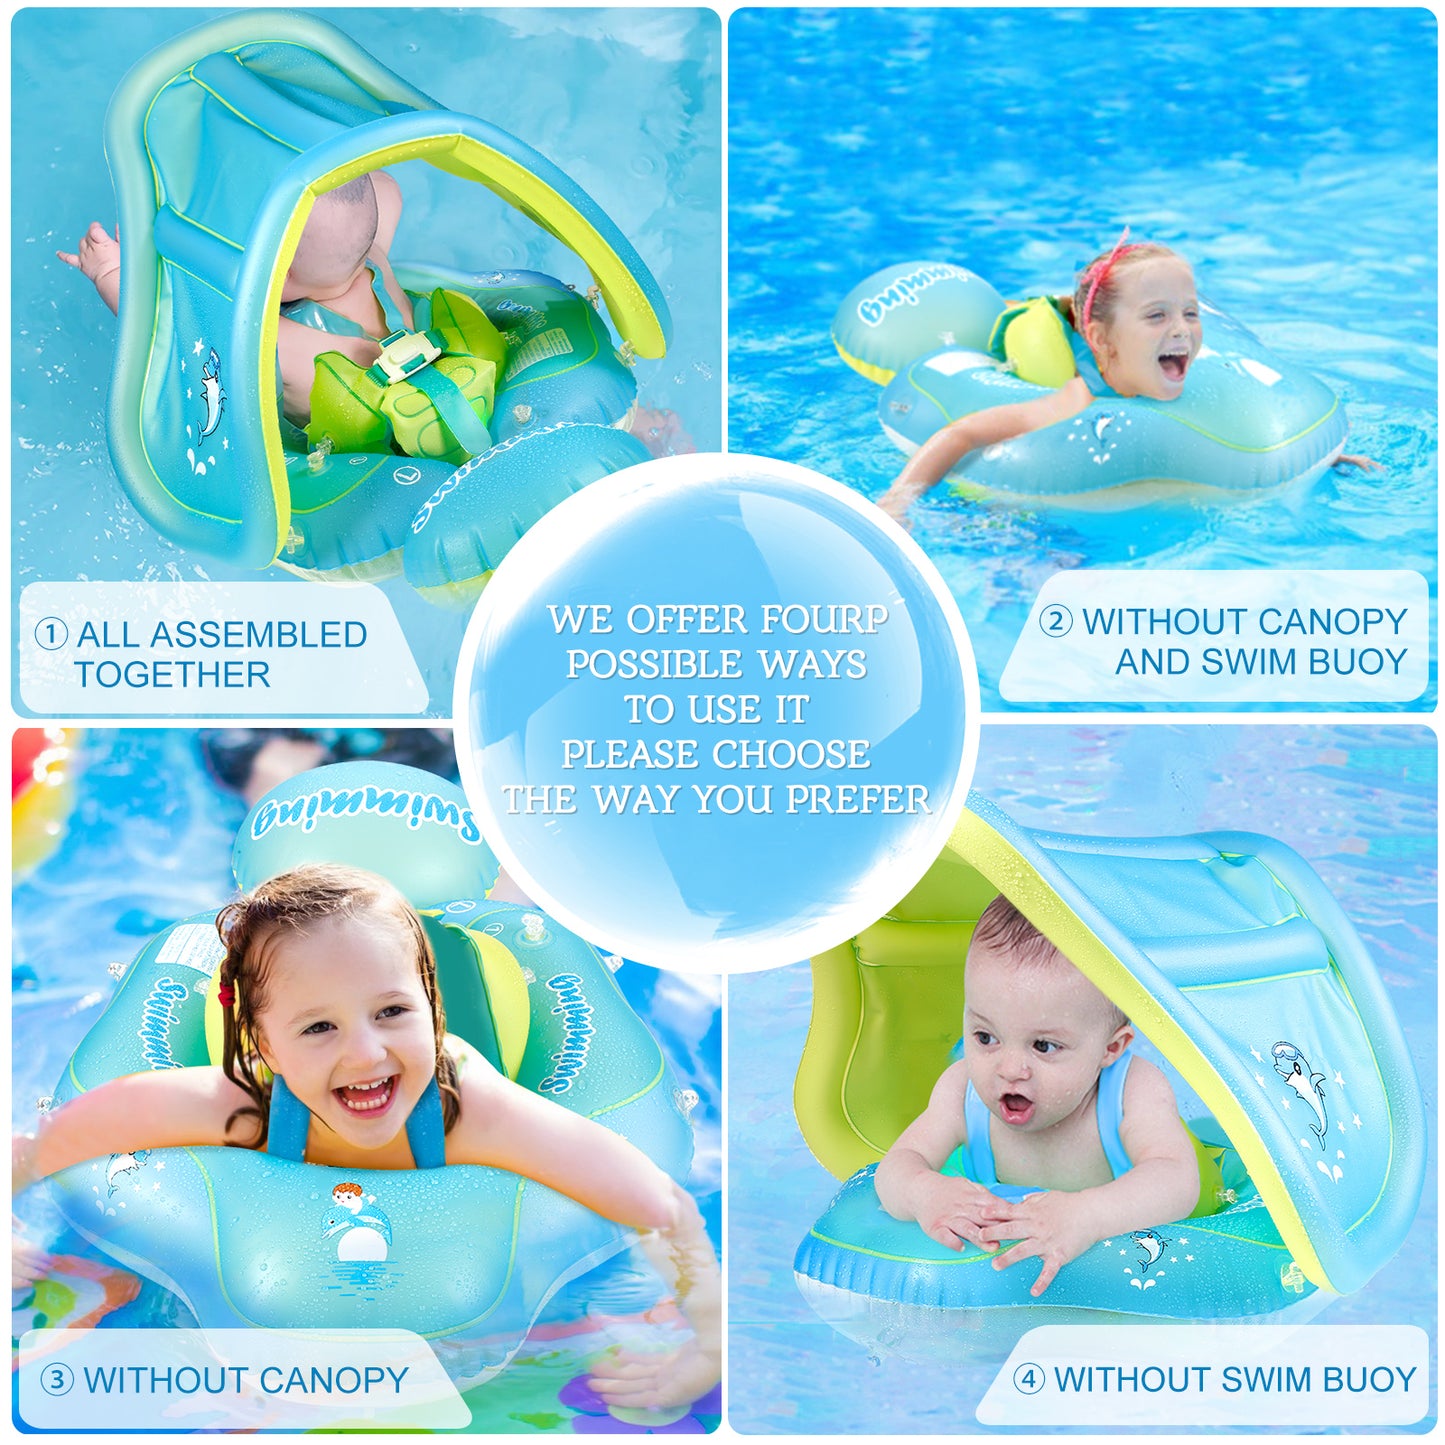 Vextronic Infant Pool Float Inflatable Baby Swimming Float with Sponge Safety Bottom Support Water Toys Swim Trainer for Ages of 3-72 Months